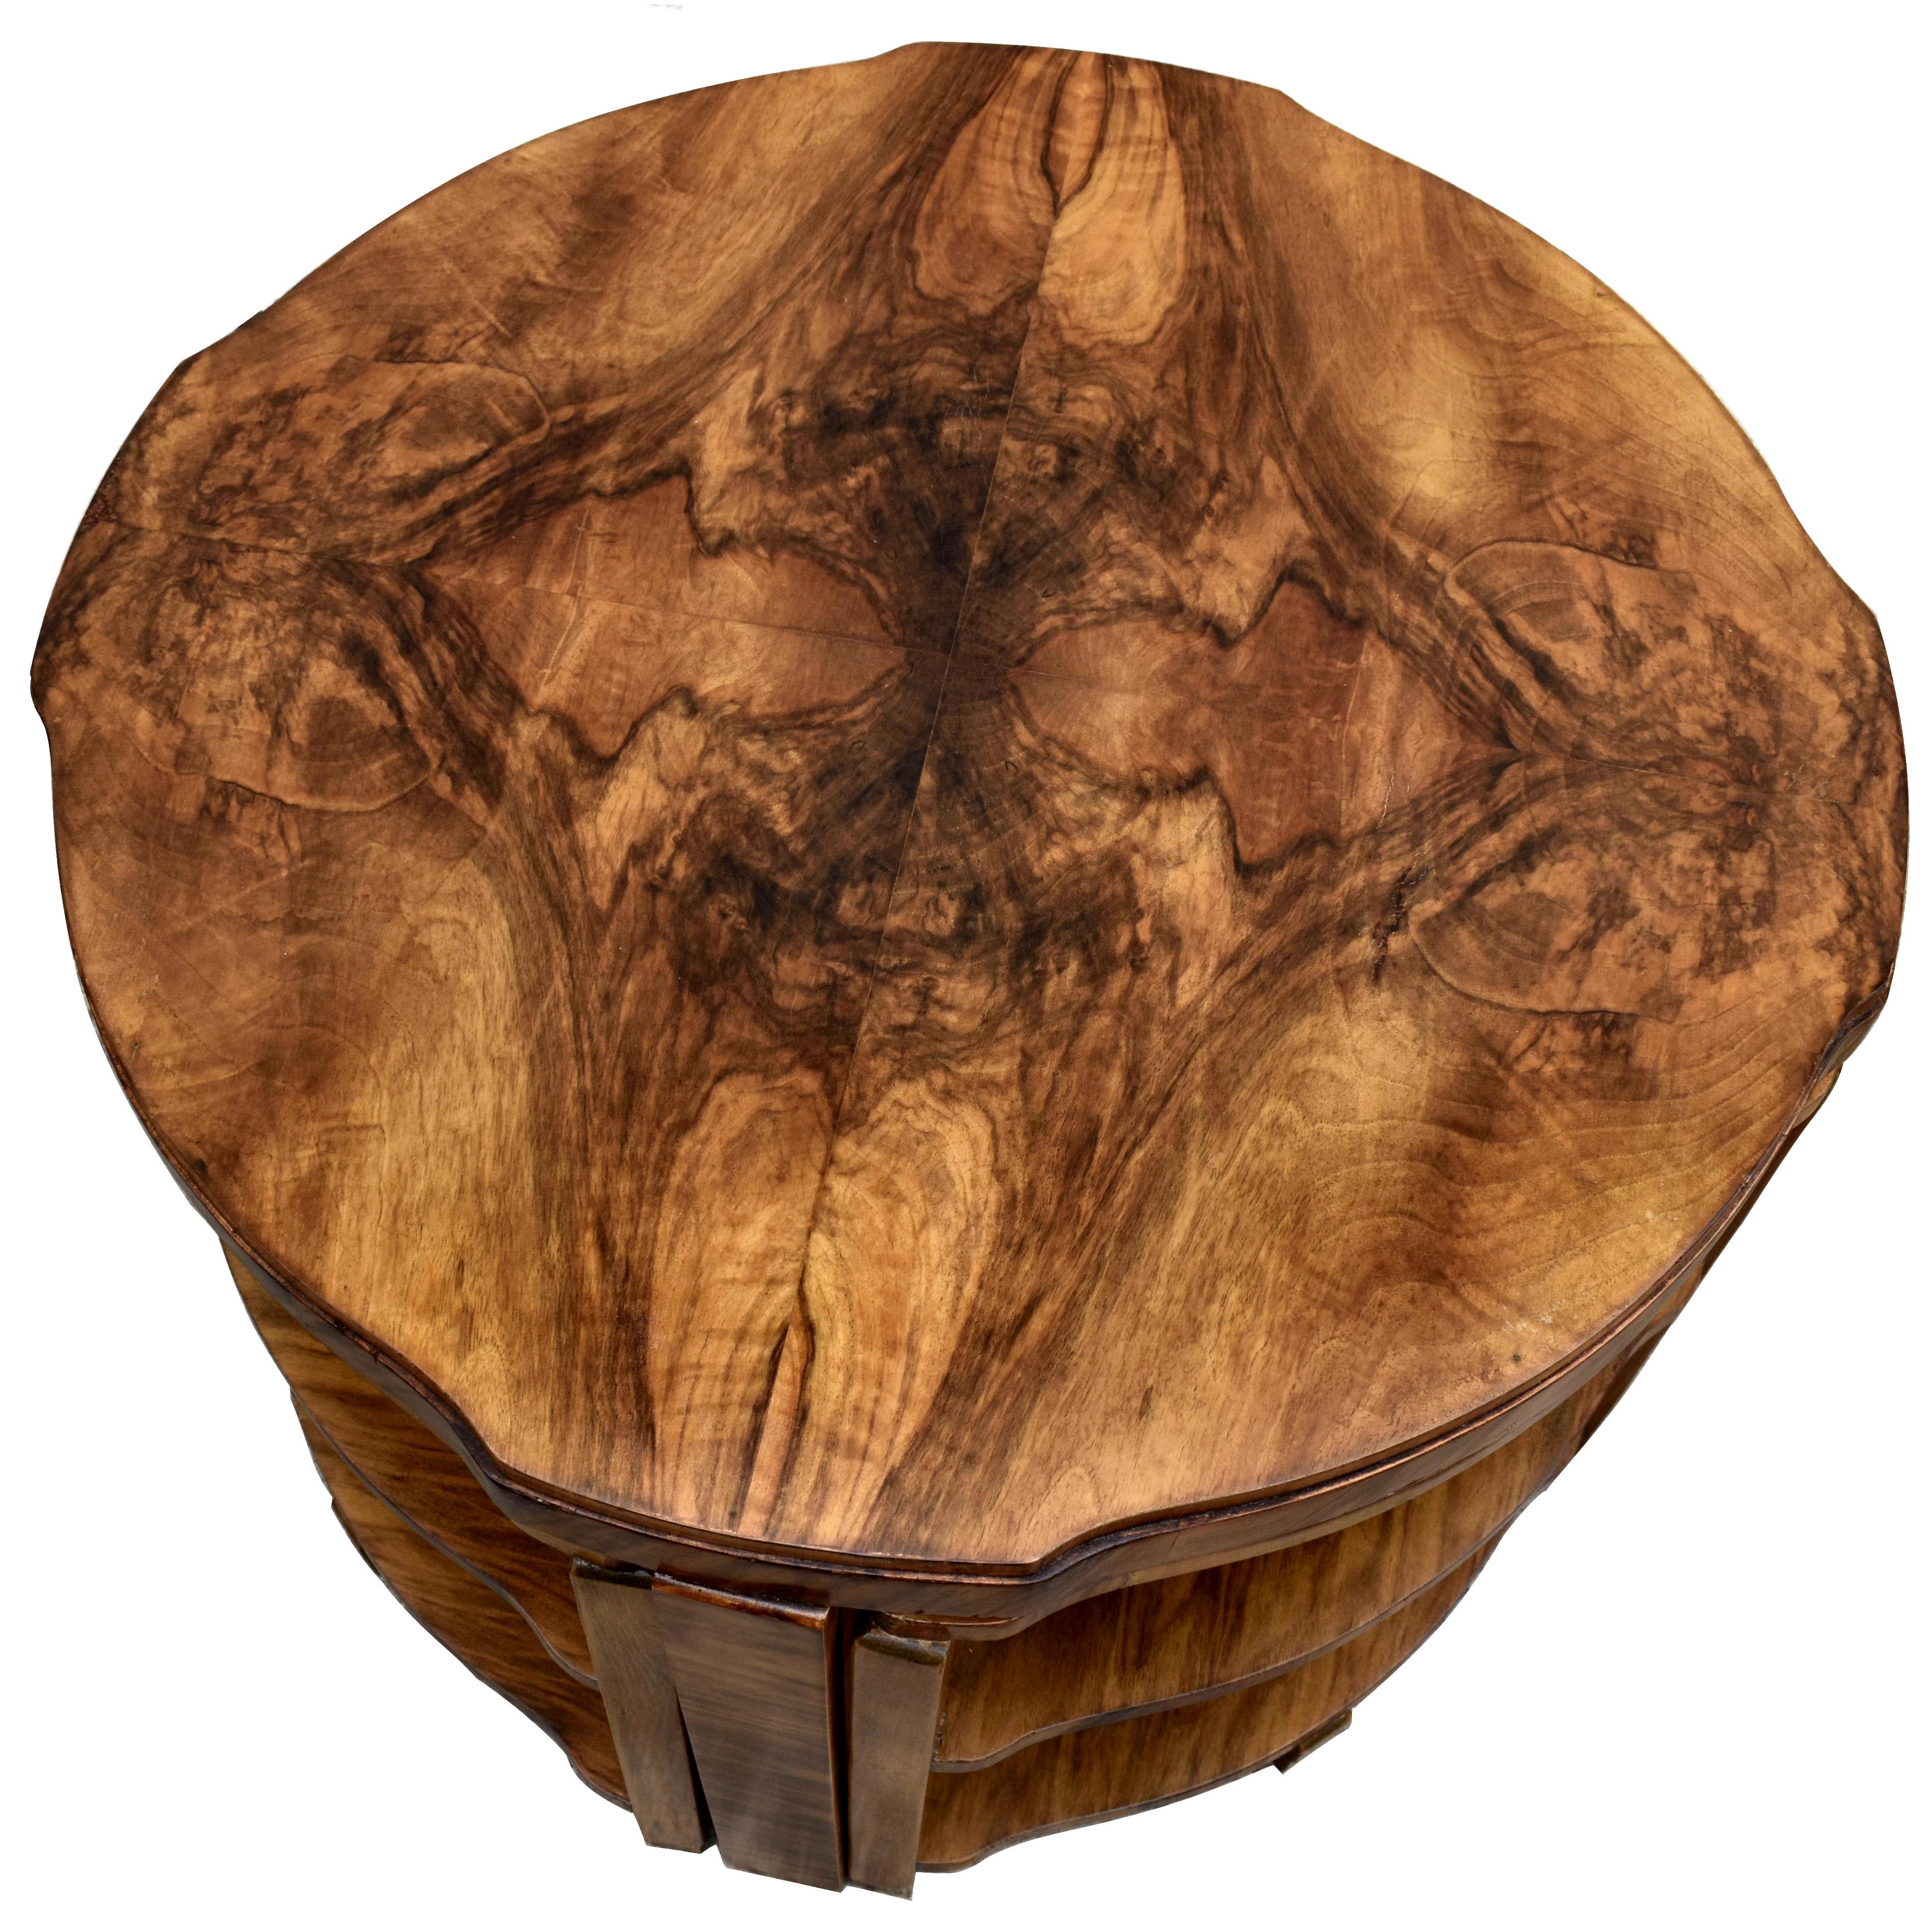 Art Deco High Quality Figured Walnut Quintetto Nest of 5 Tables, English, 1930 For Sale 2